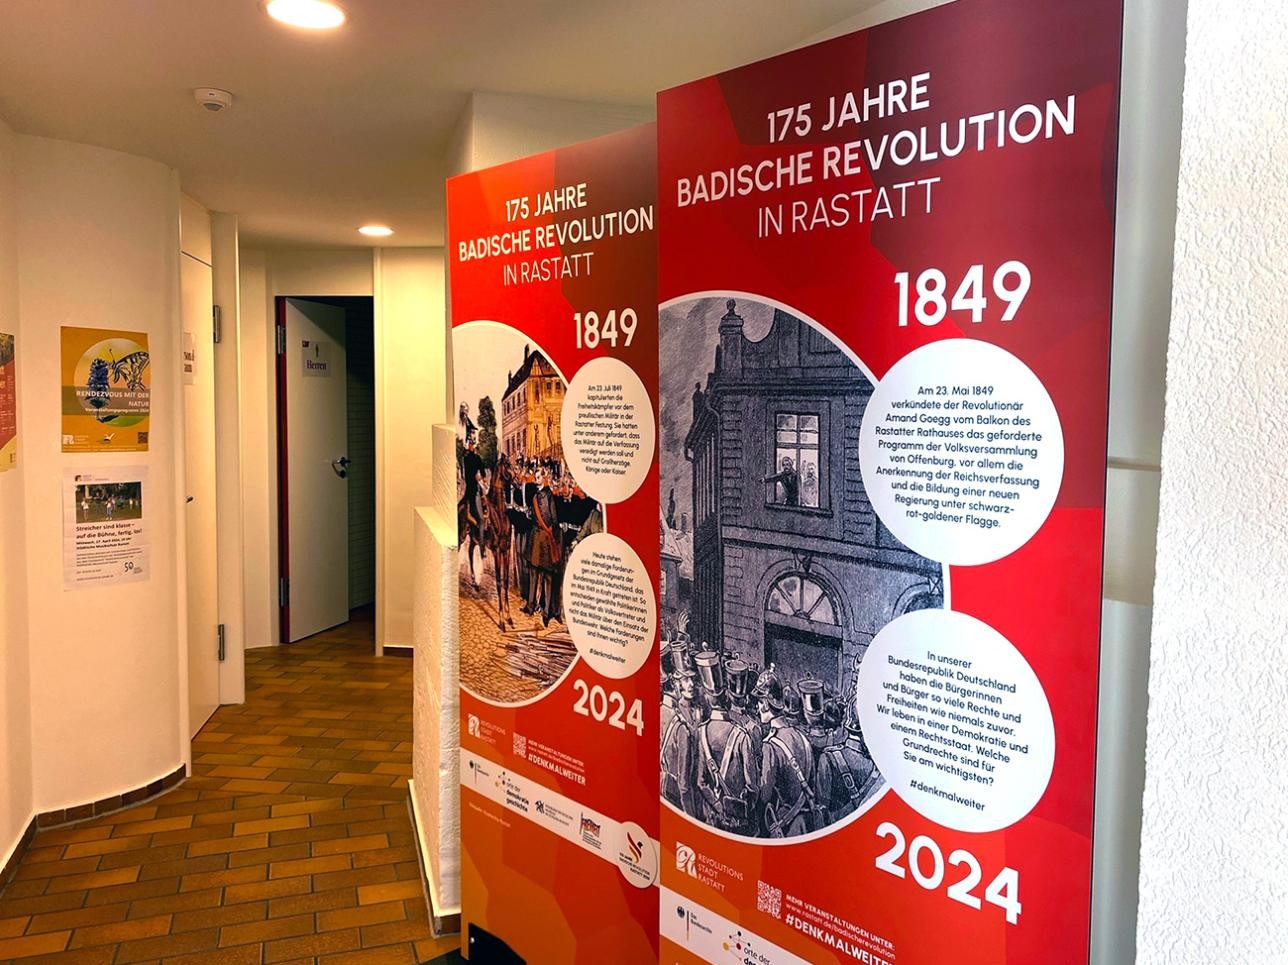 Information boards in the tourist information center on 175 years of the Baden Revolution